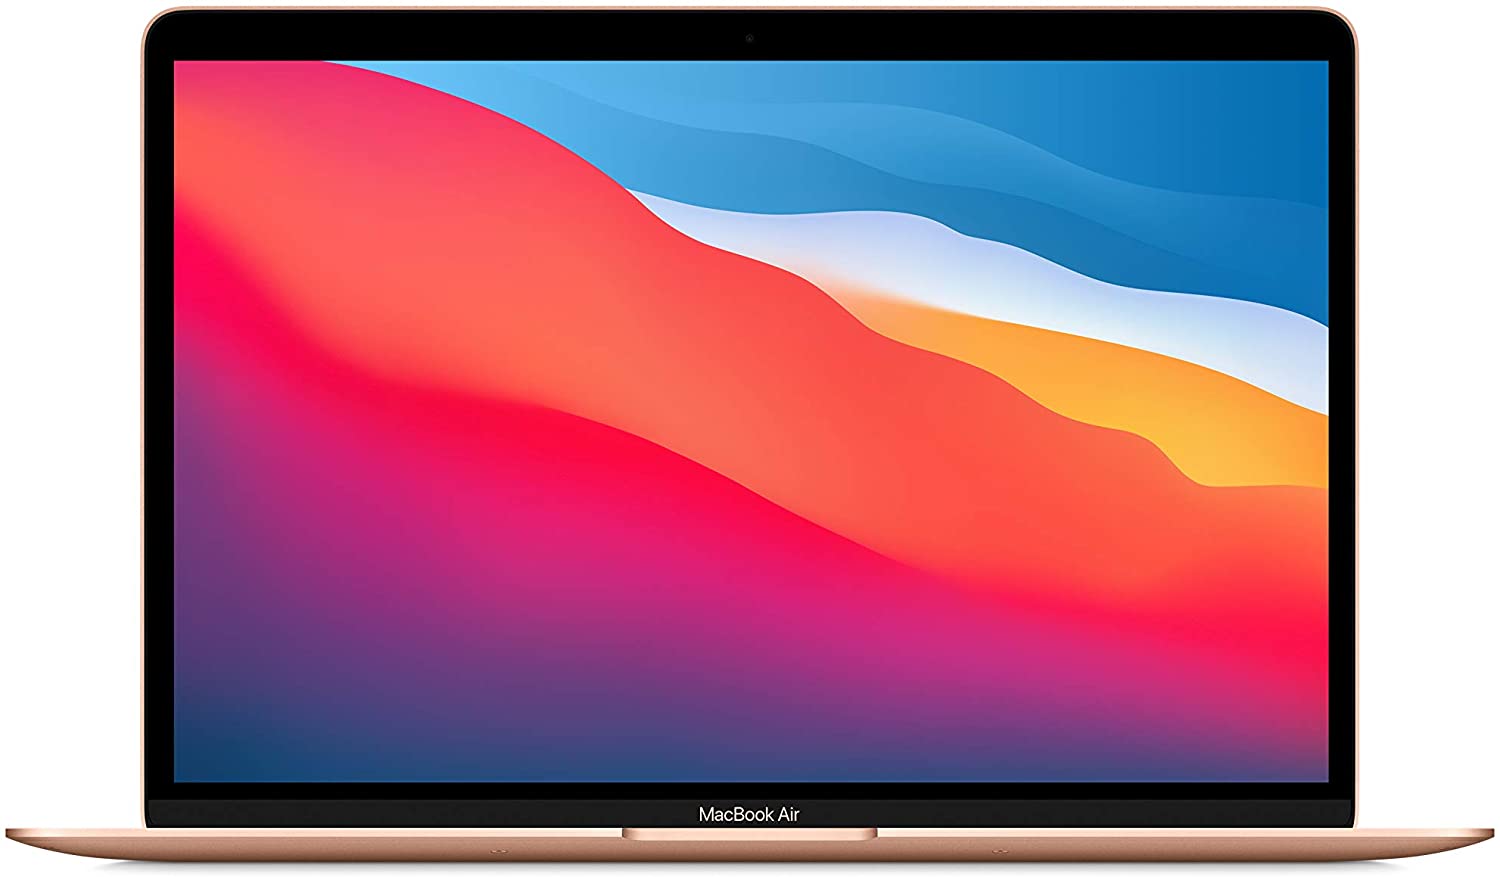 New Apple MacBook Air with Apple M1 Chip (13-inch, 8GB RAM, 256GB SSD Storage) - Gold (Latest Model)